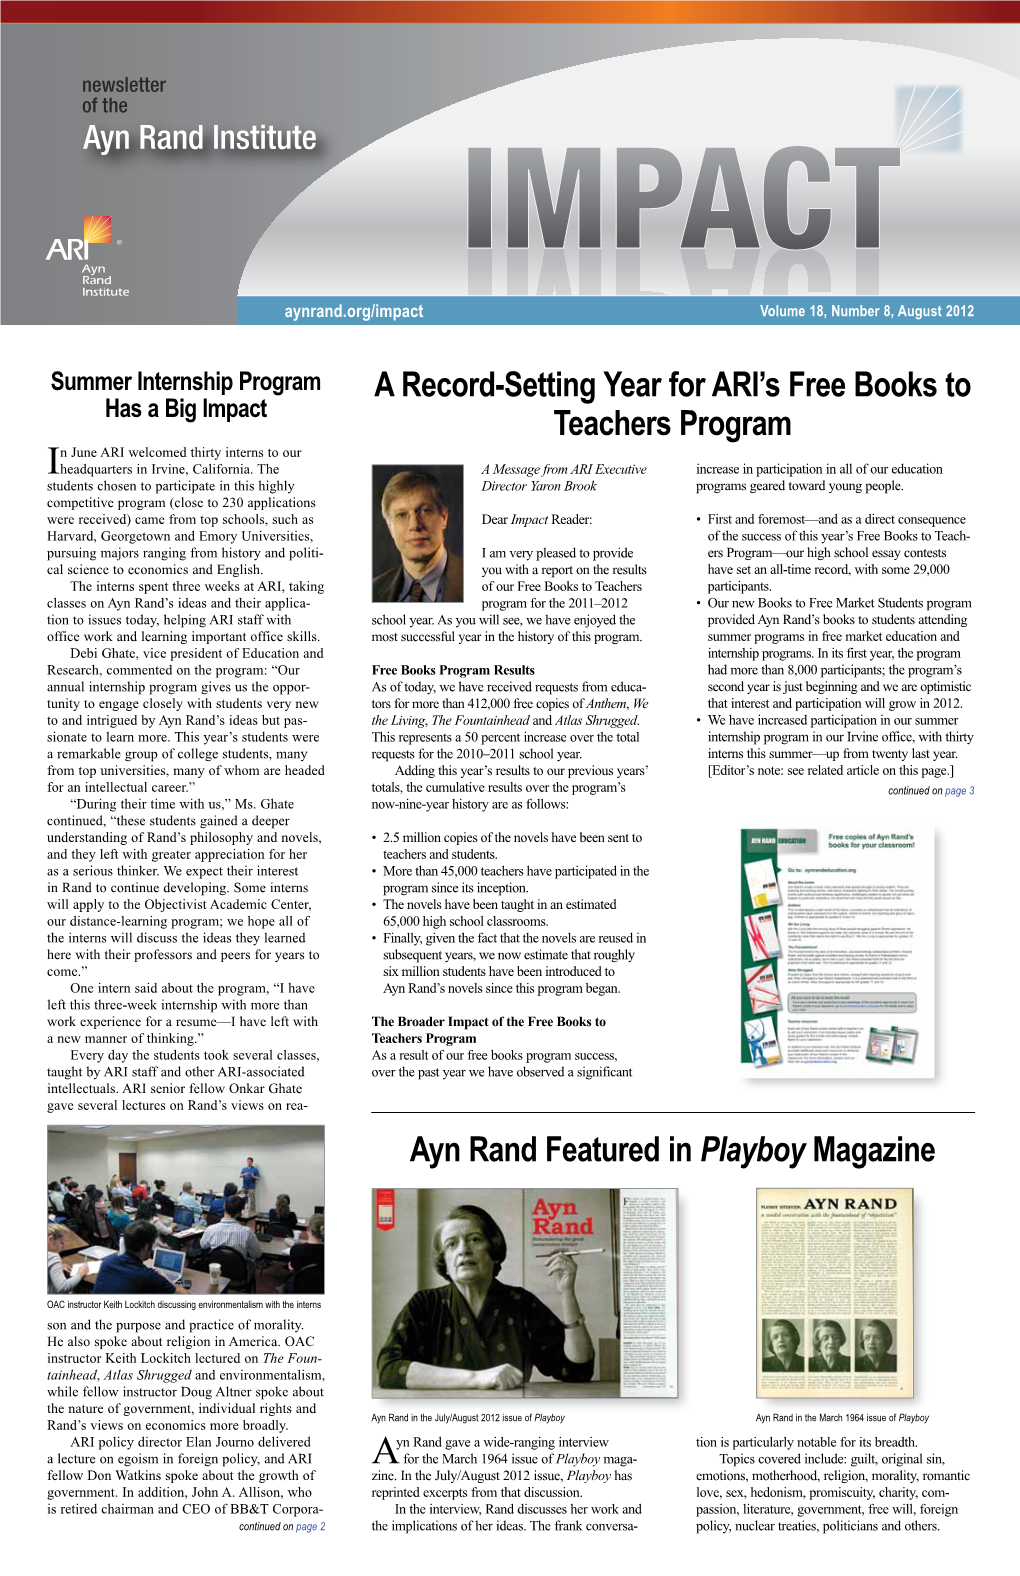 A Record-Setting Year for ARI's Free Books to Teachers Program Ayn Rand Featured in Playboy Magazine